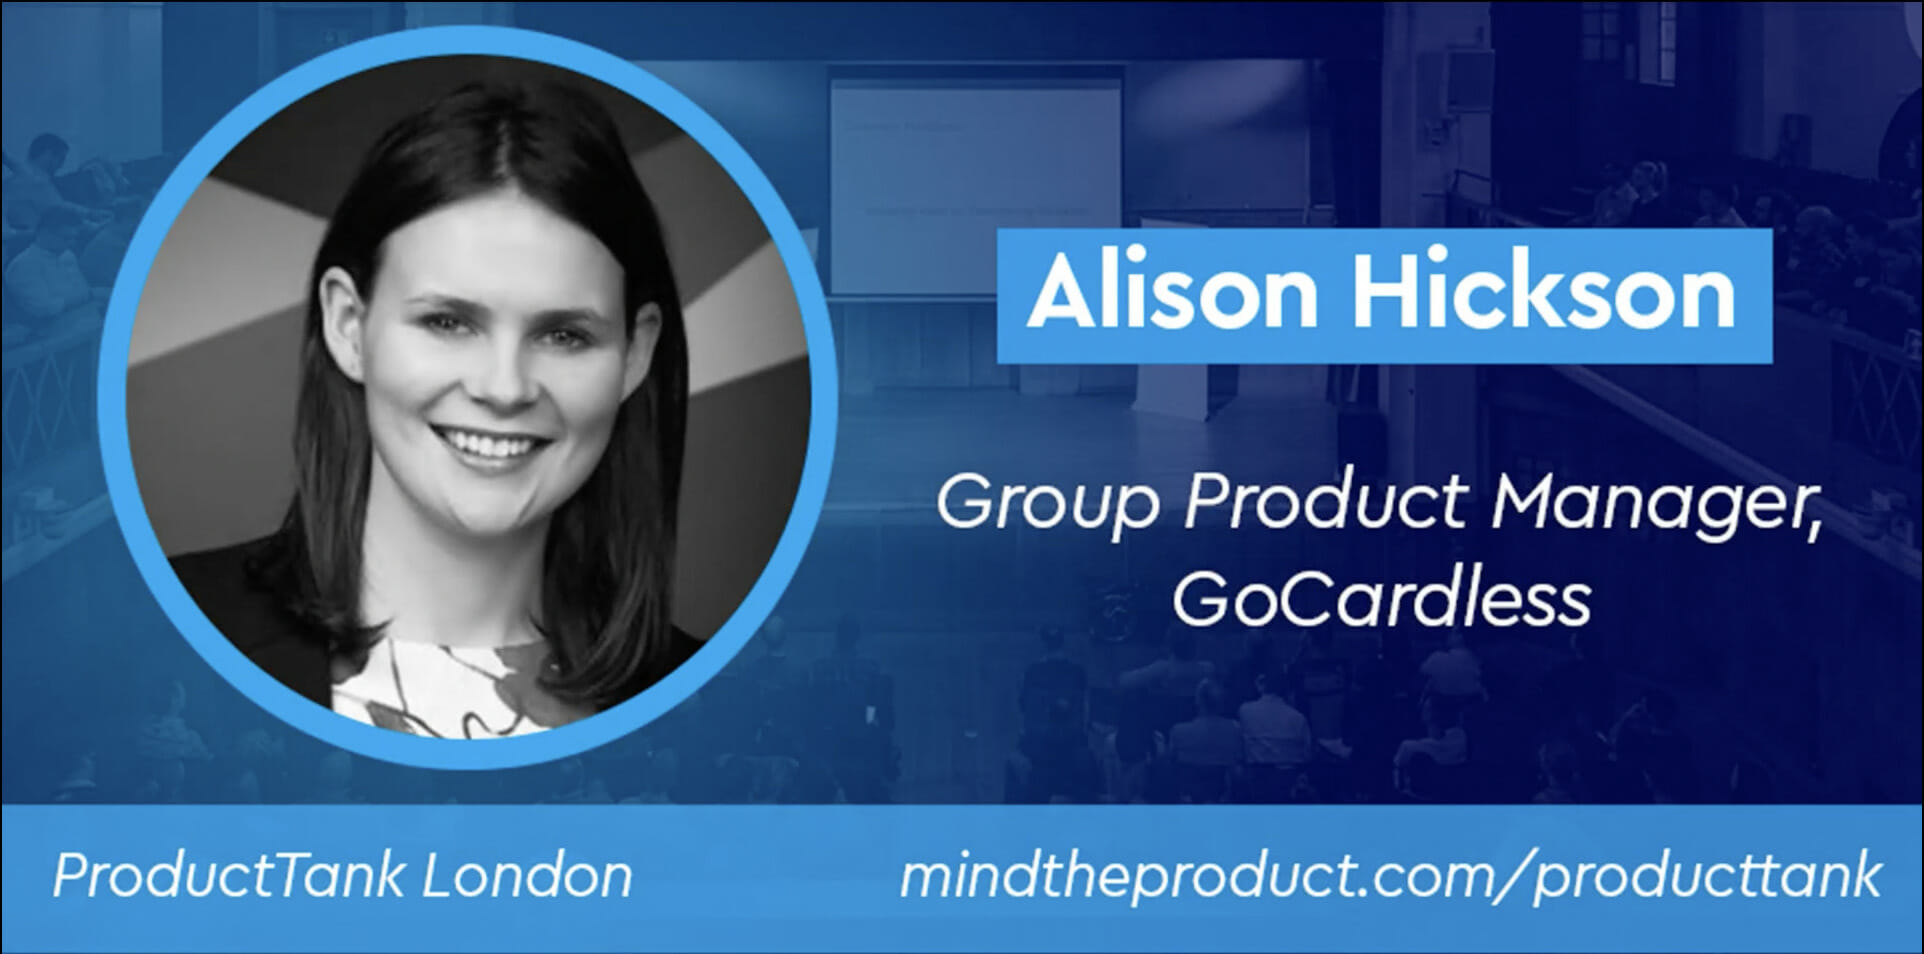 sunday-rewind:-sharpening-your-product-craft-as-an-internal-product-manager-by-alison-hickson